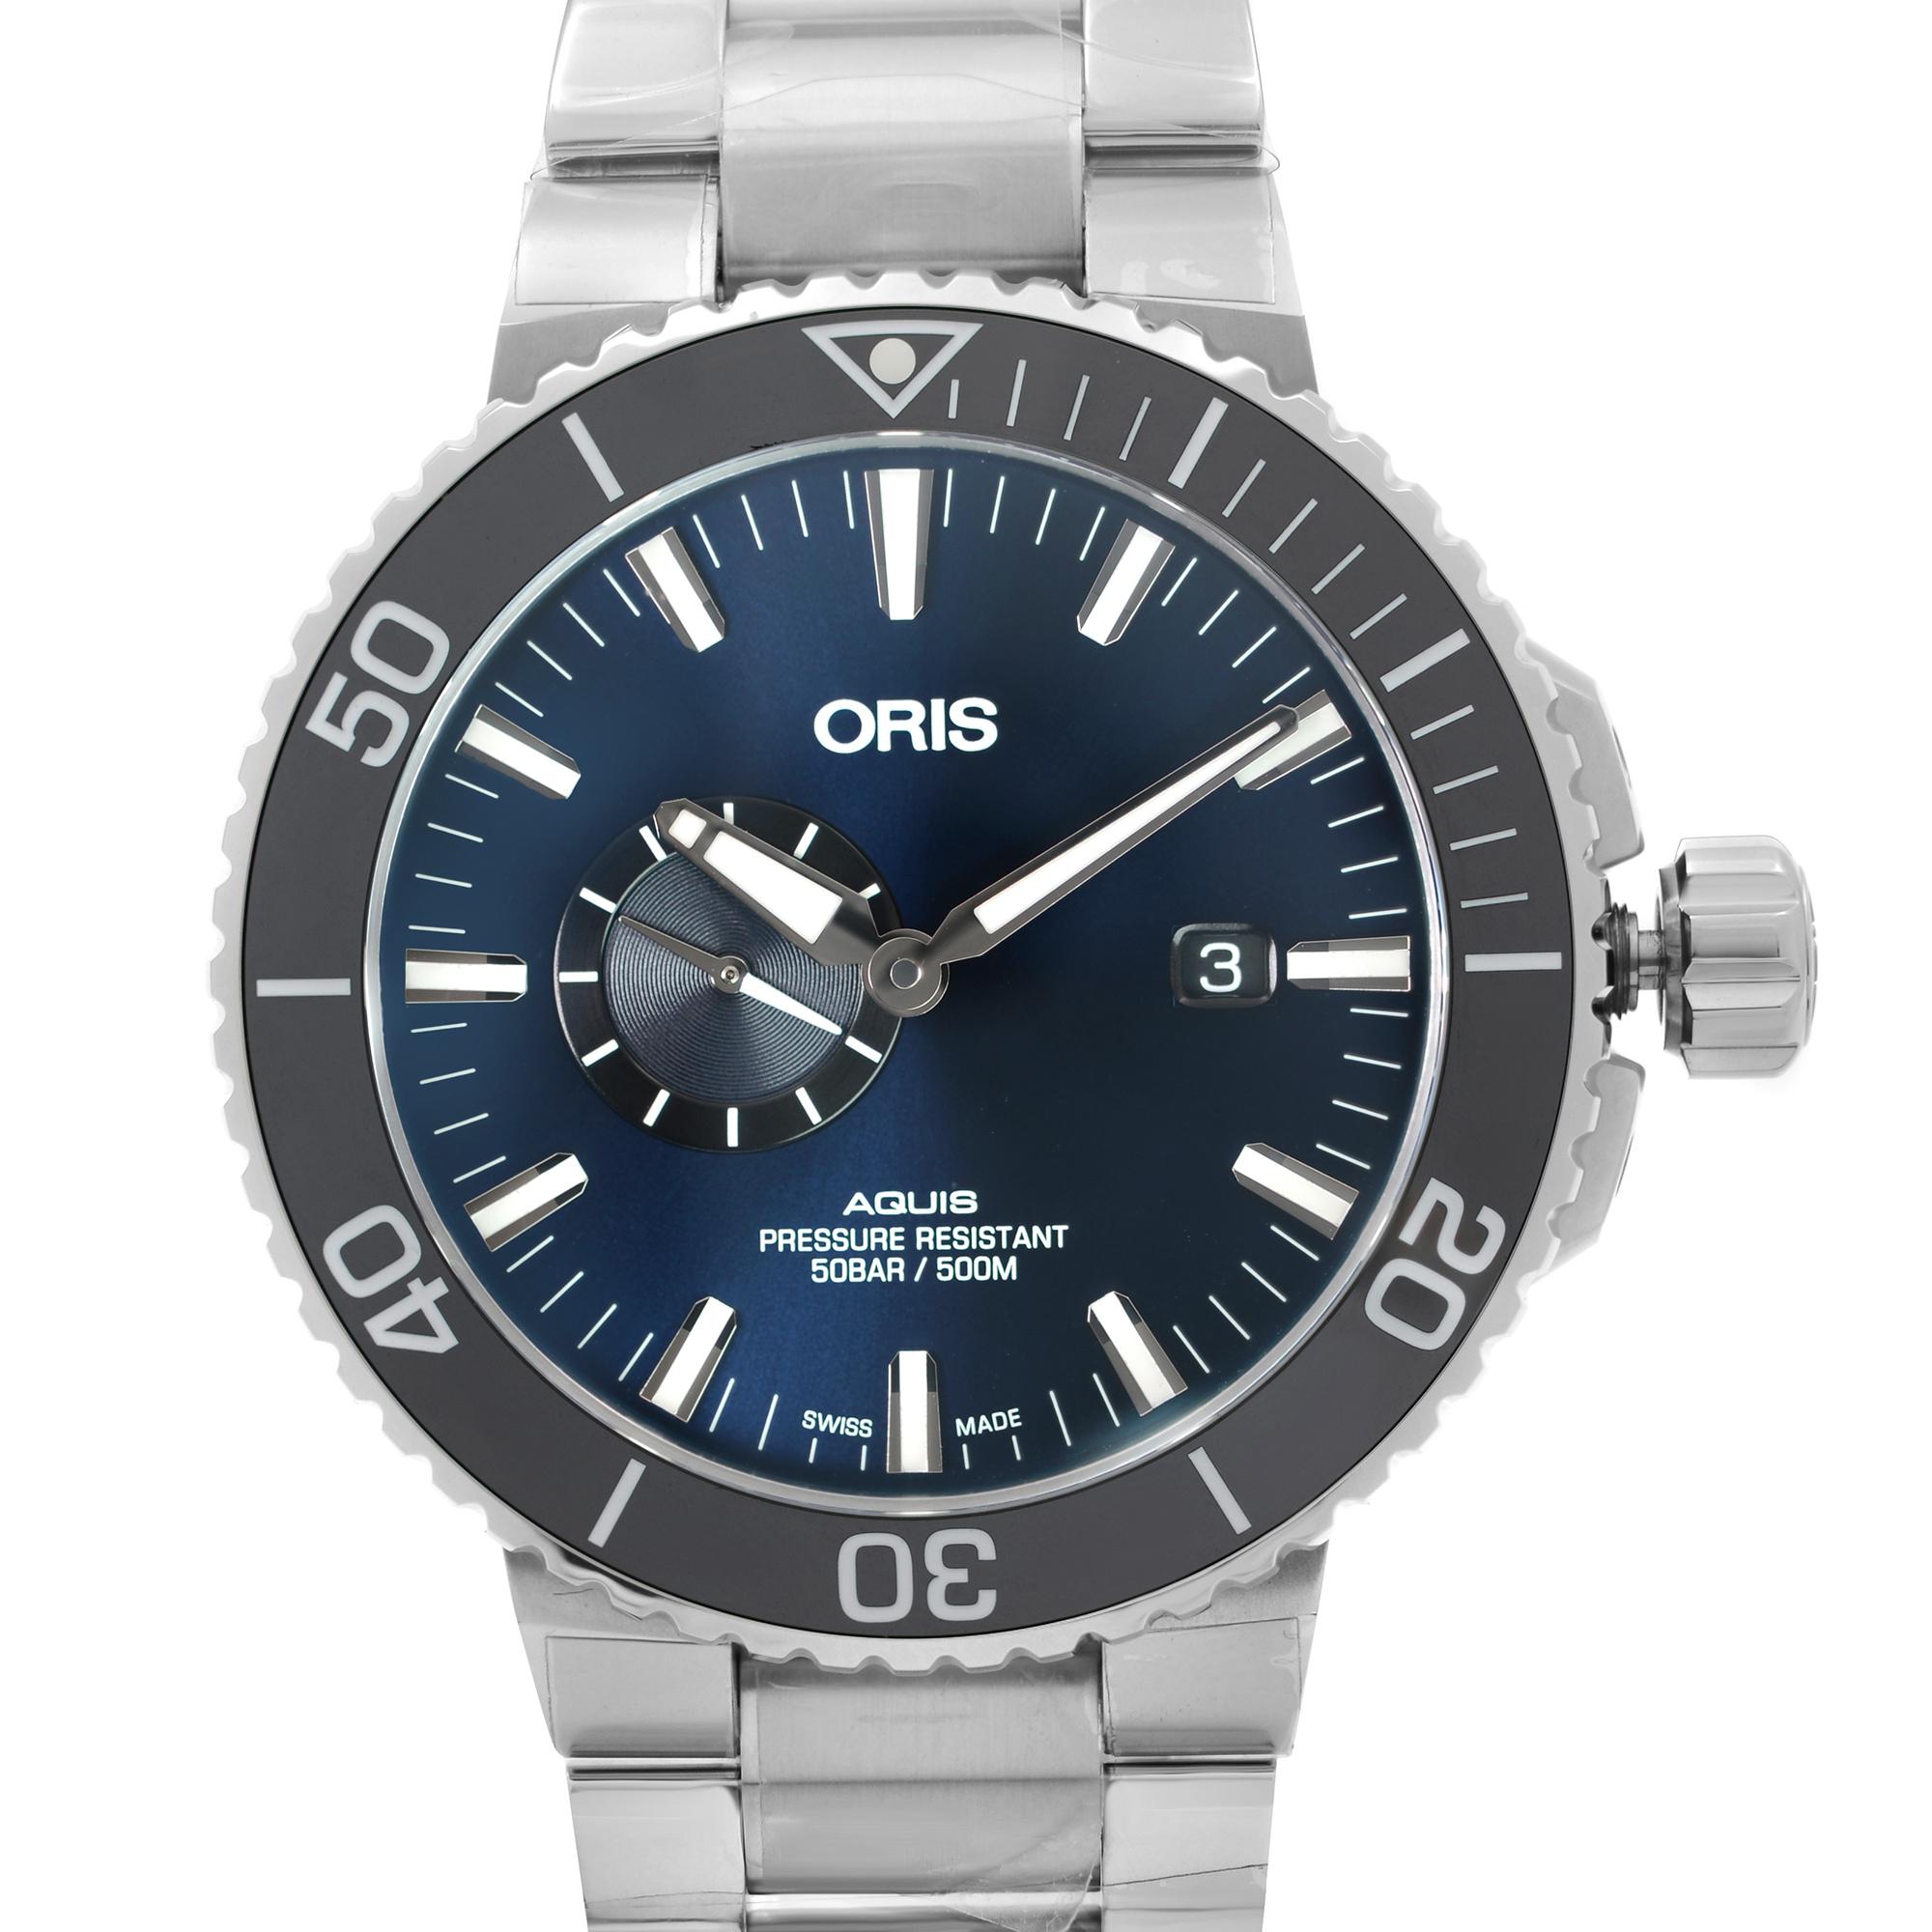 Display Model Oris Aquis Date Stainless Steel Ceramic Blue Dial Automatic Mens Watch 01 743 7733 4135-07 8 24 05PEB. This Beautiful Timepiece is Powered by Mechanical (Automatic) Movement And Features: Round Stainless Steel Case with a Stainless